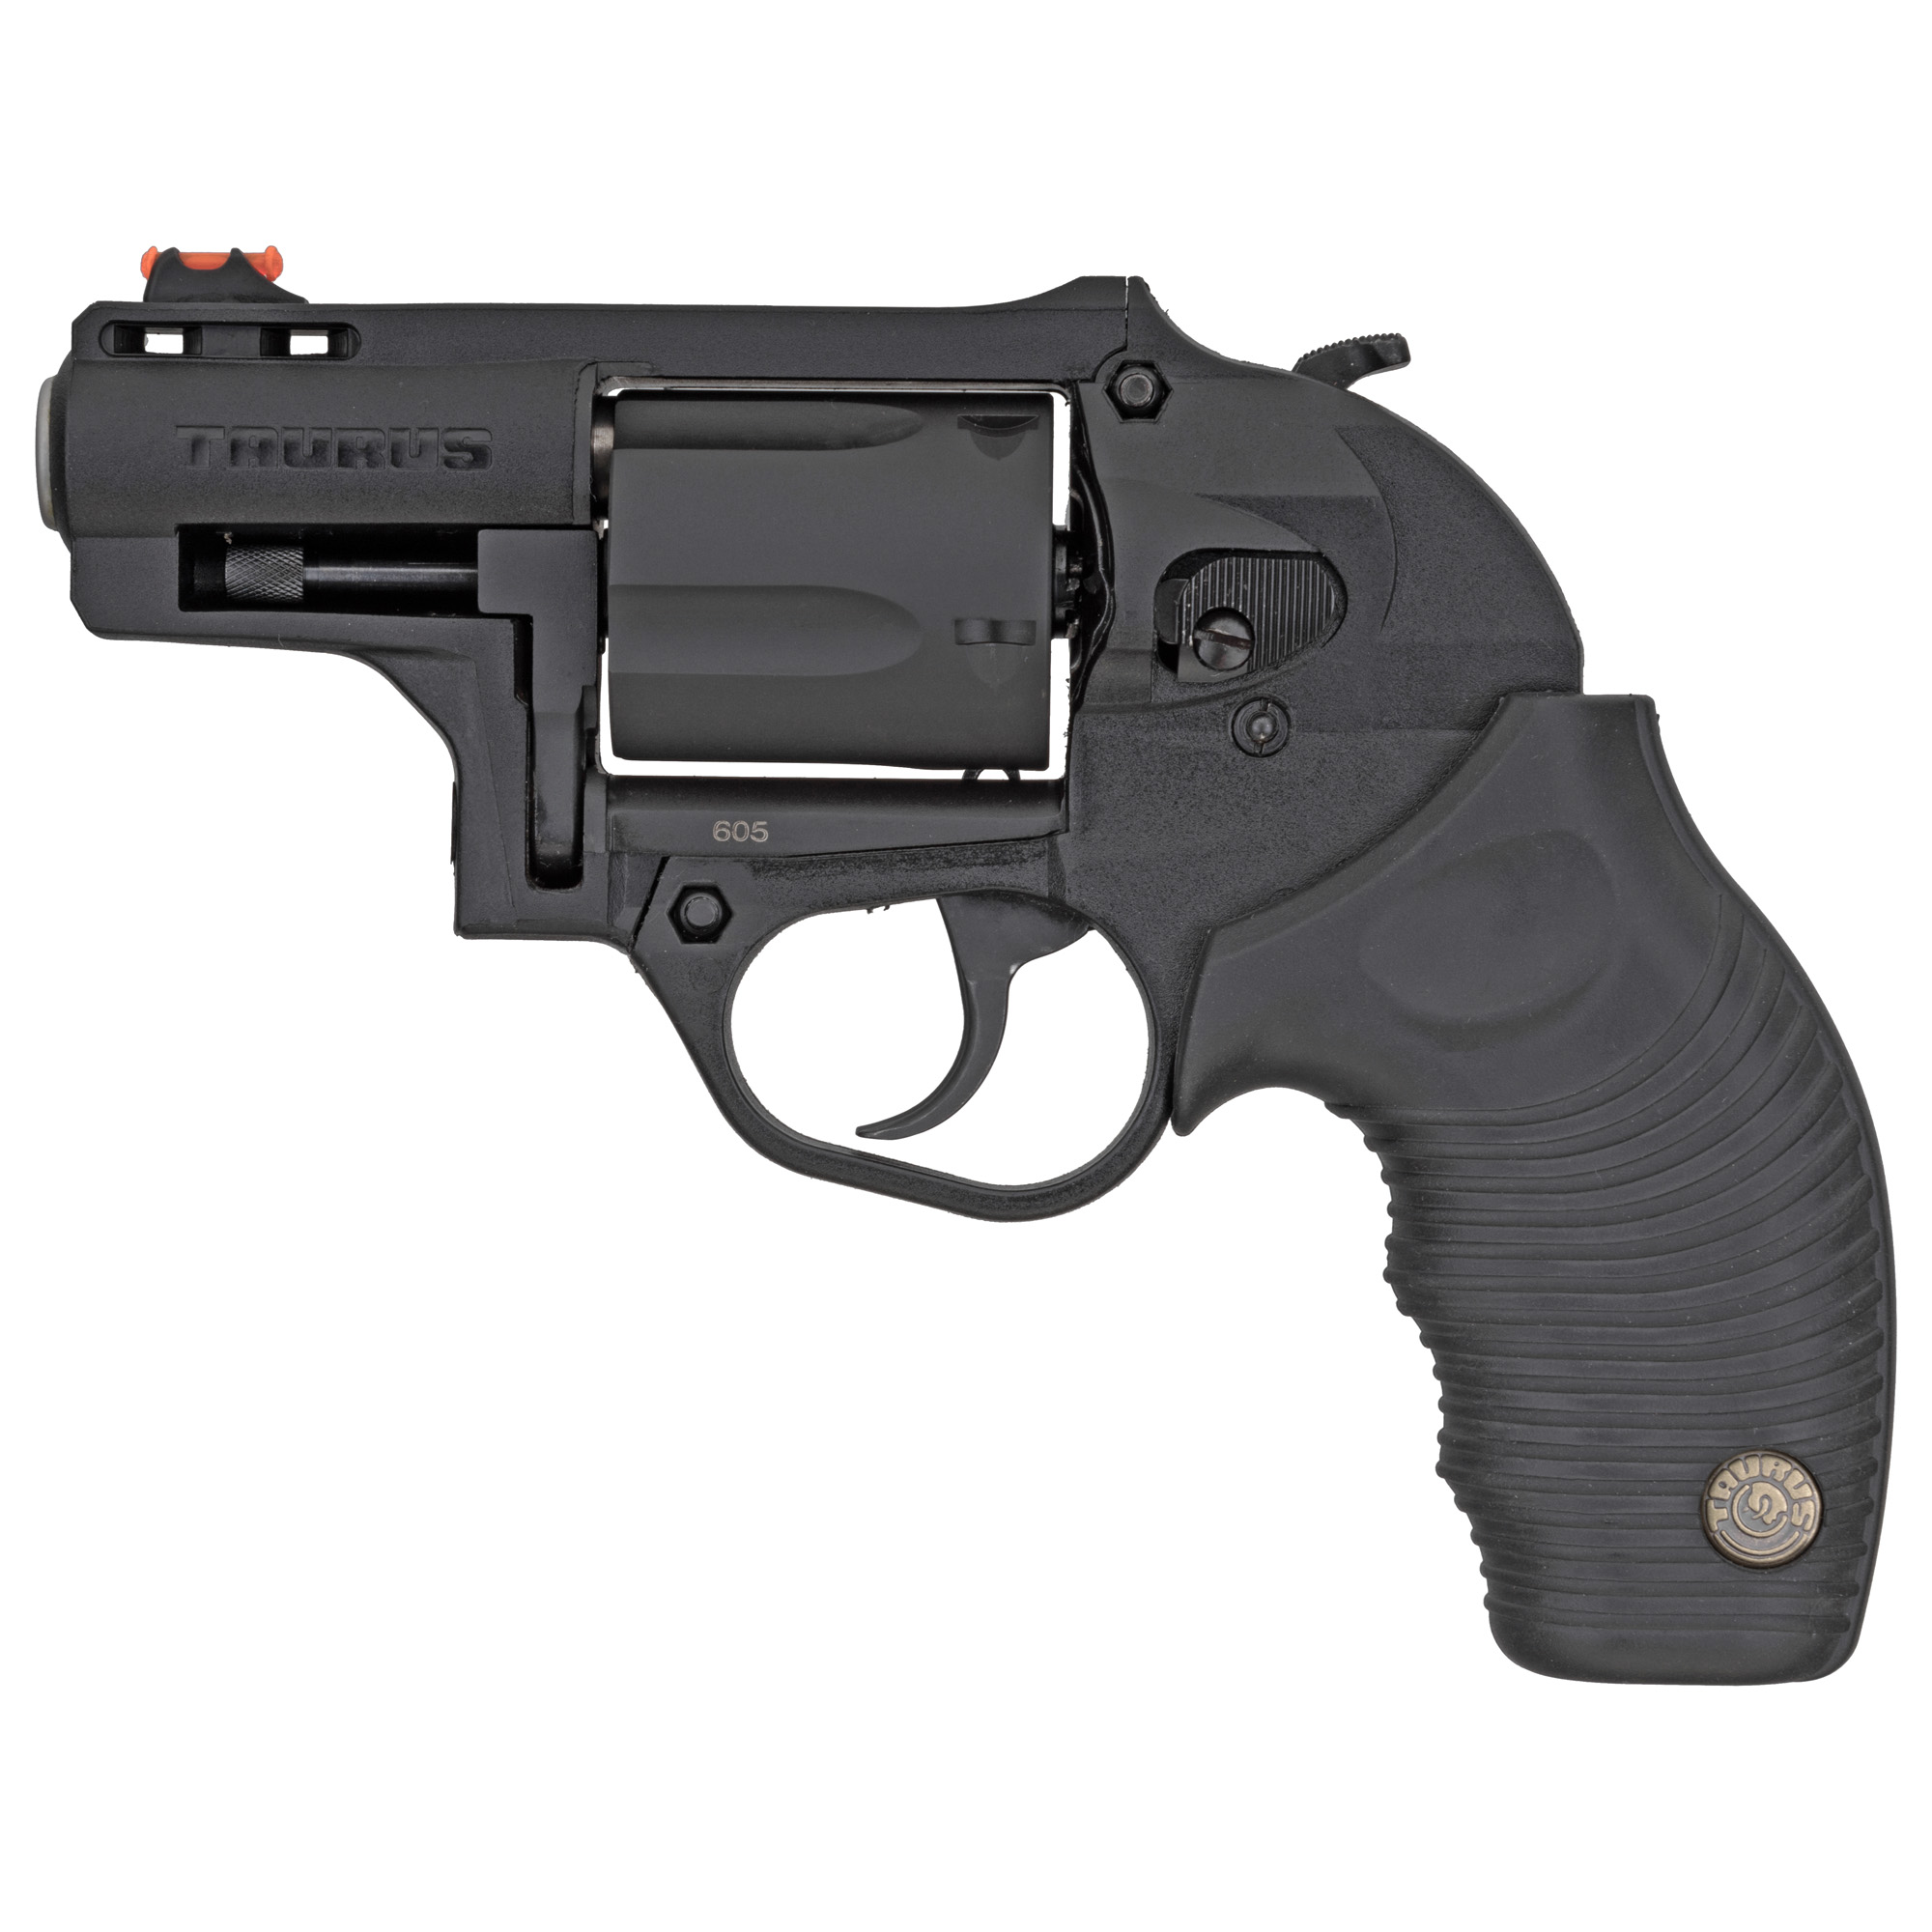 TAURUS 605 357MAG 2 5RD BLK POLY